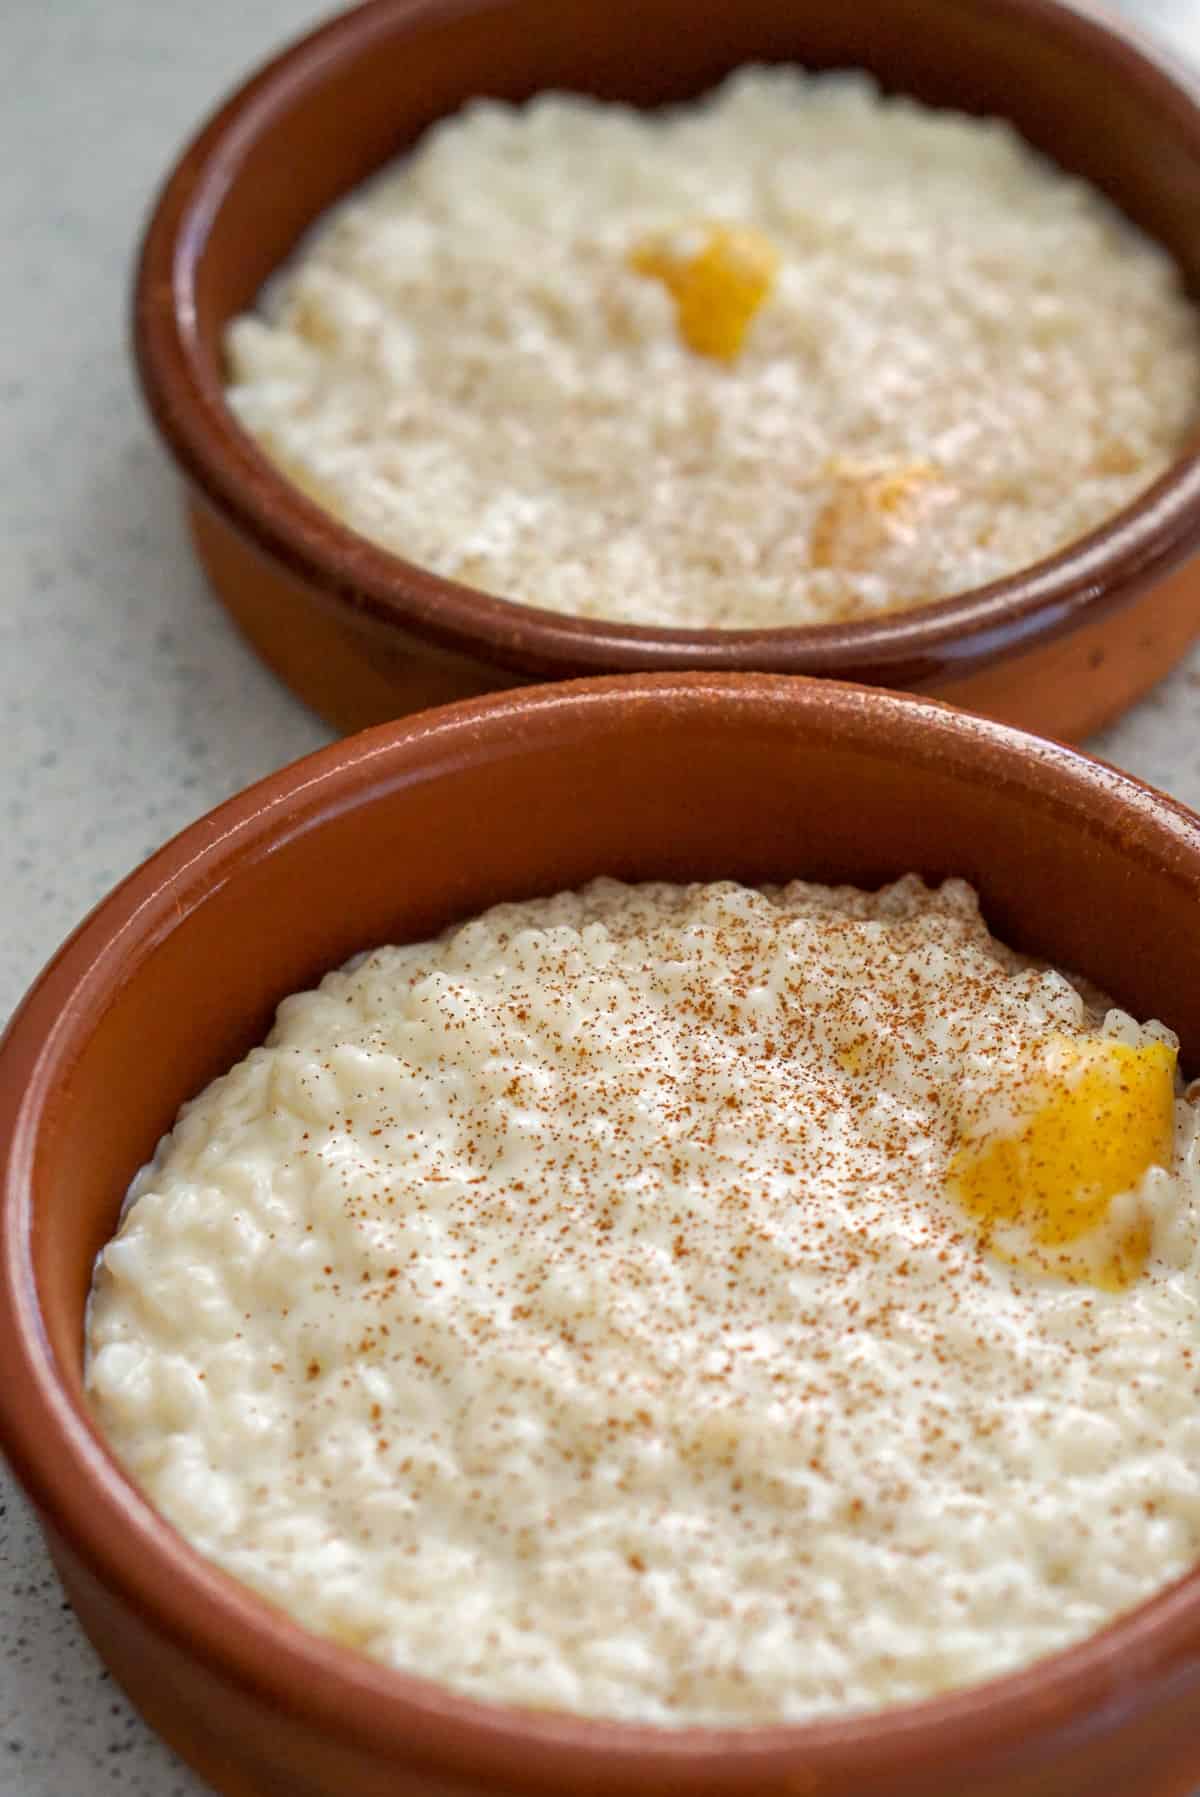 Two servings of arroz con leche in clay bowls.